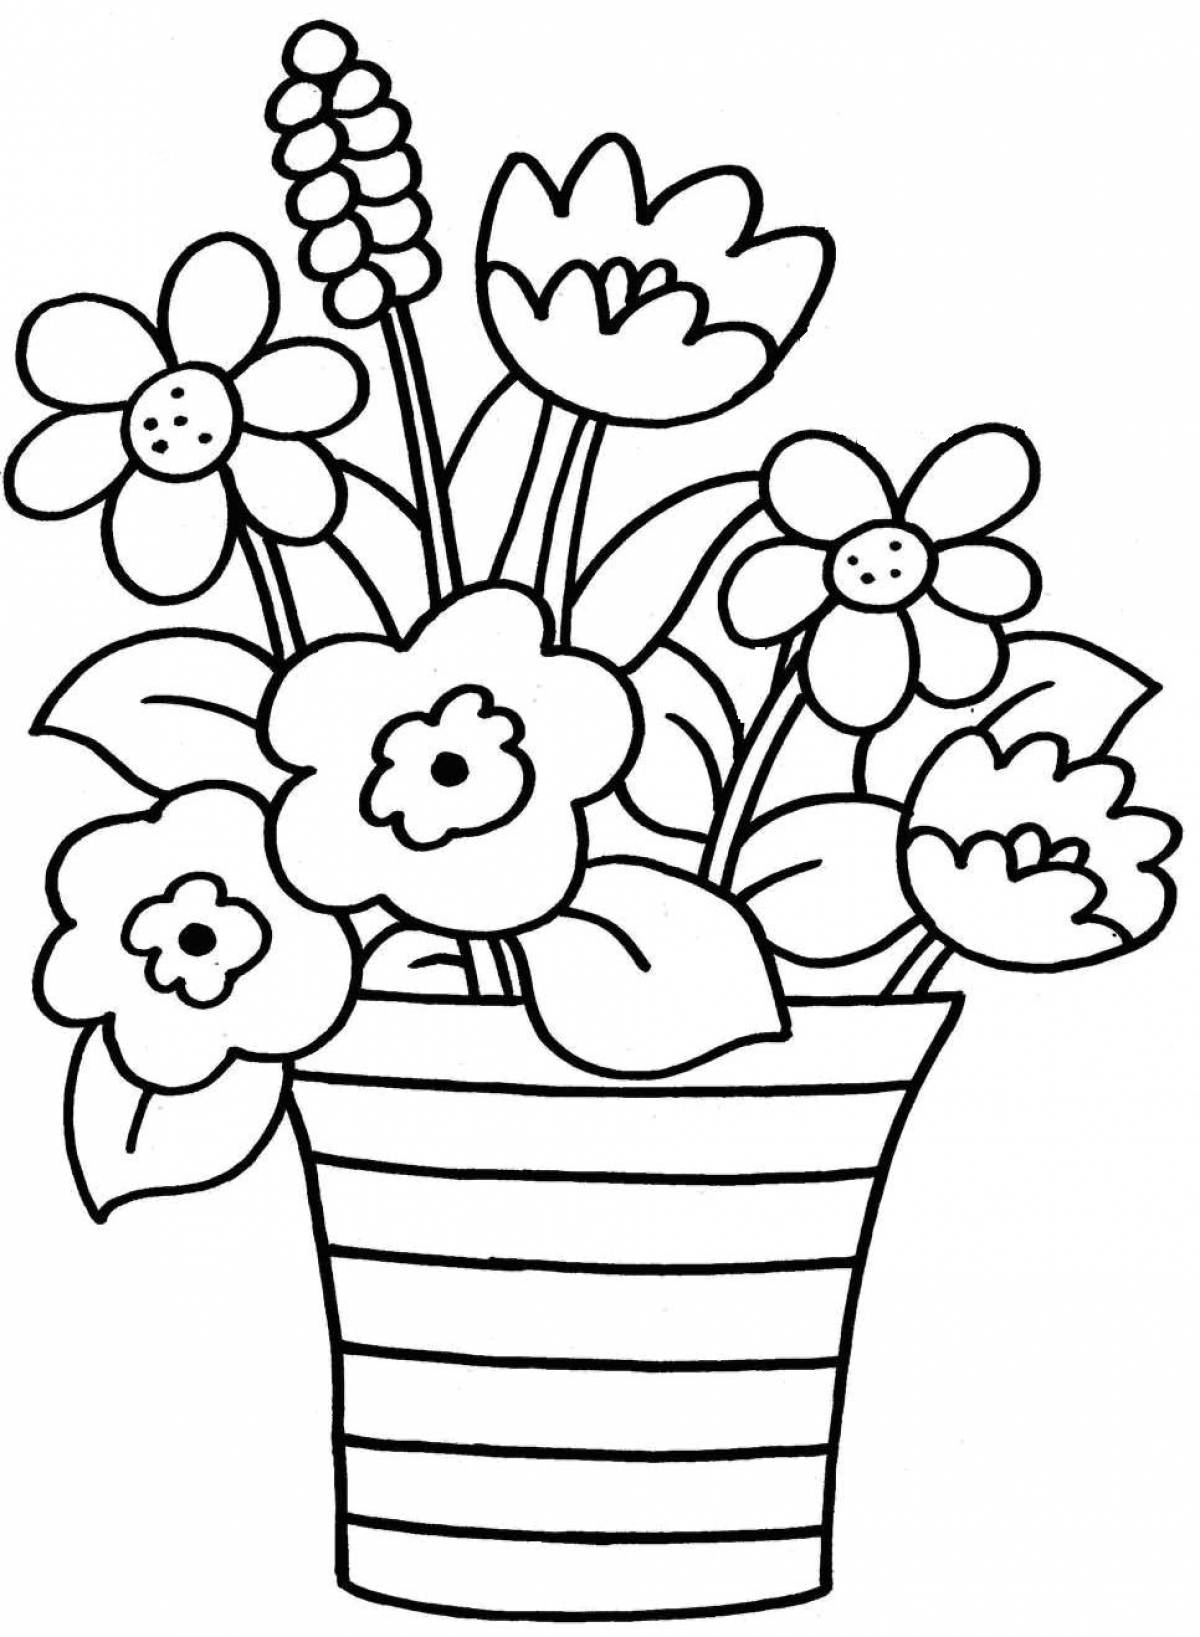 Coloring flowers flowers for children 4-5 years old